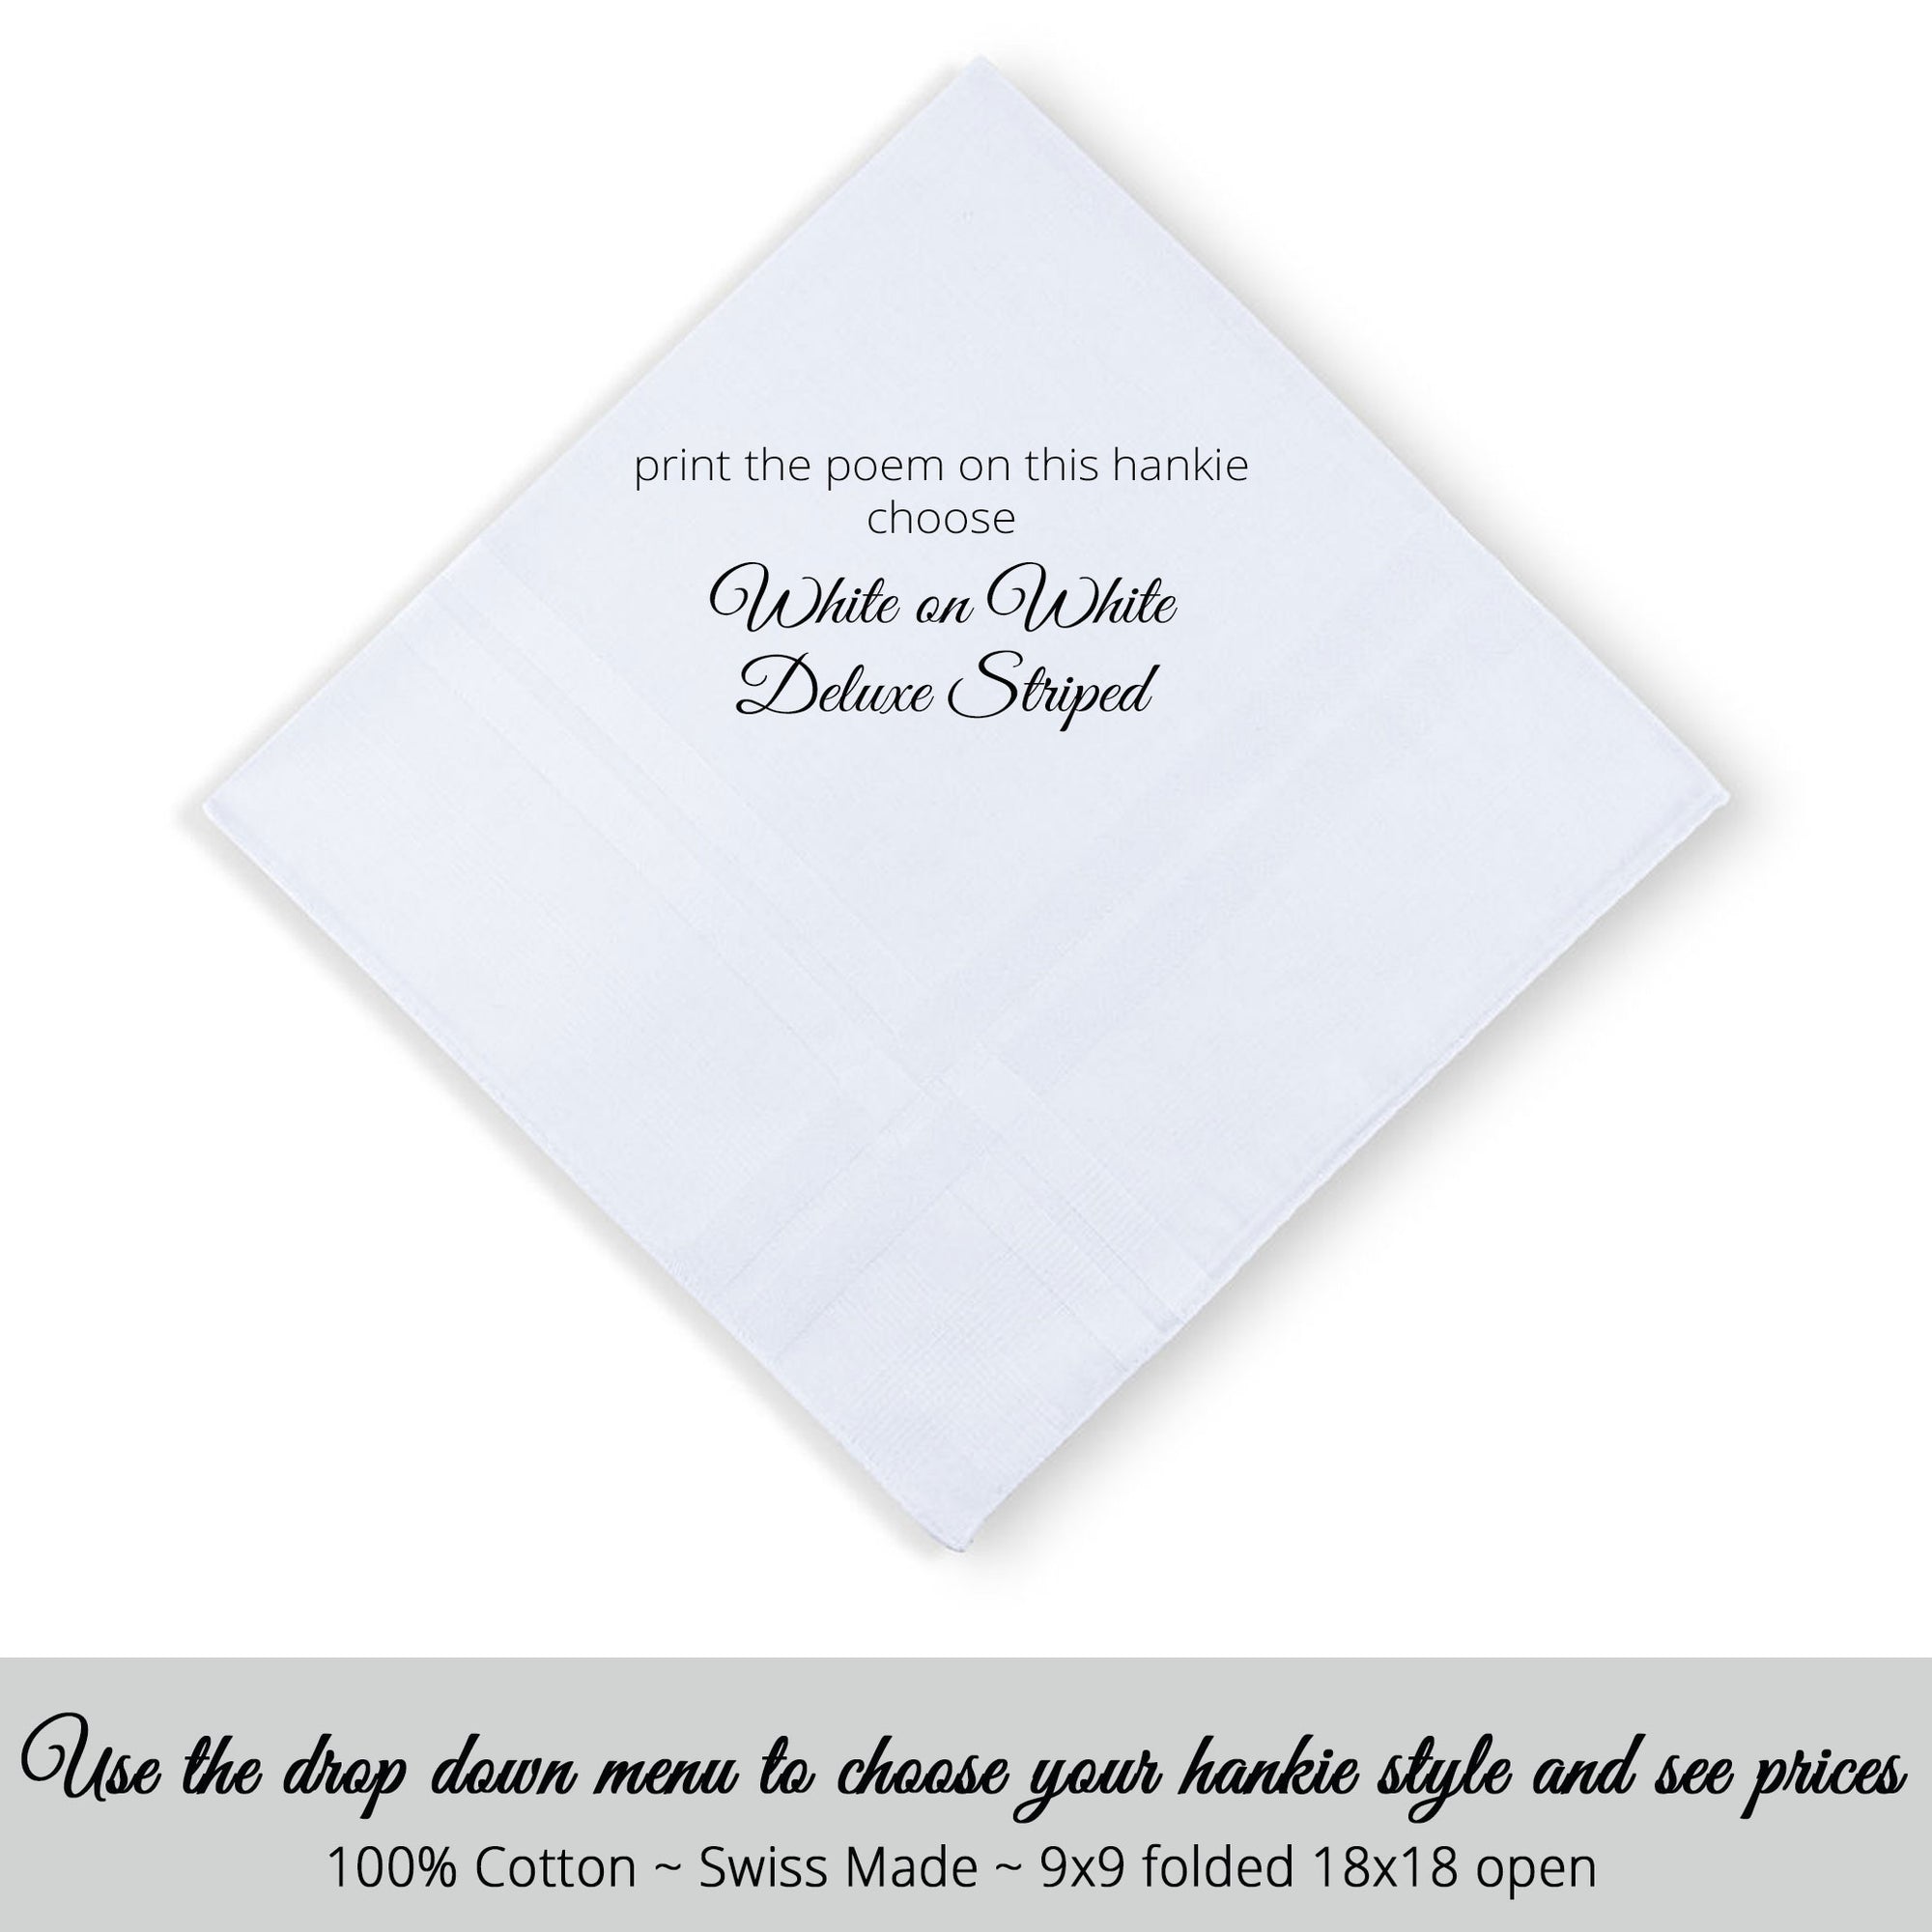 Gay Wedding Masculine Hankie style Swiss made white on white deluxe striped for the Officiant from the Brides poem printed hankie